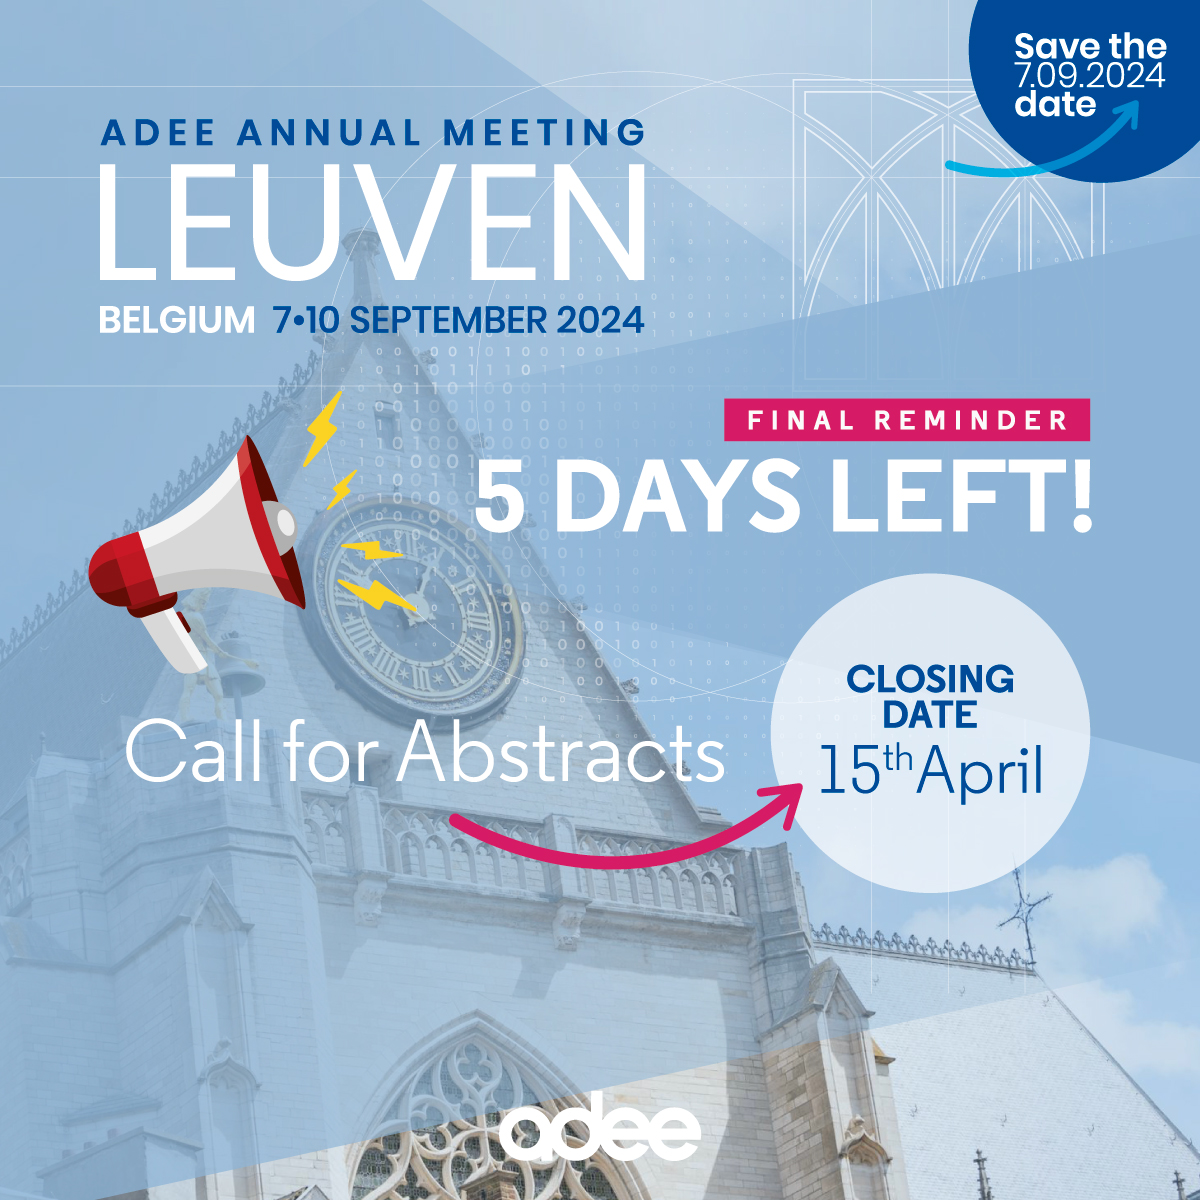 Final Reminder: ADEE Leuven Call For Abstracts Closes next Monday (15th April)! To find out more: adee.org/meetings/leuve… Online early bird and group discounted registration: adee.org/meetings/leuve… #Adee #Leuven2024 #AdeeAnnualMeeting #callforabstracts